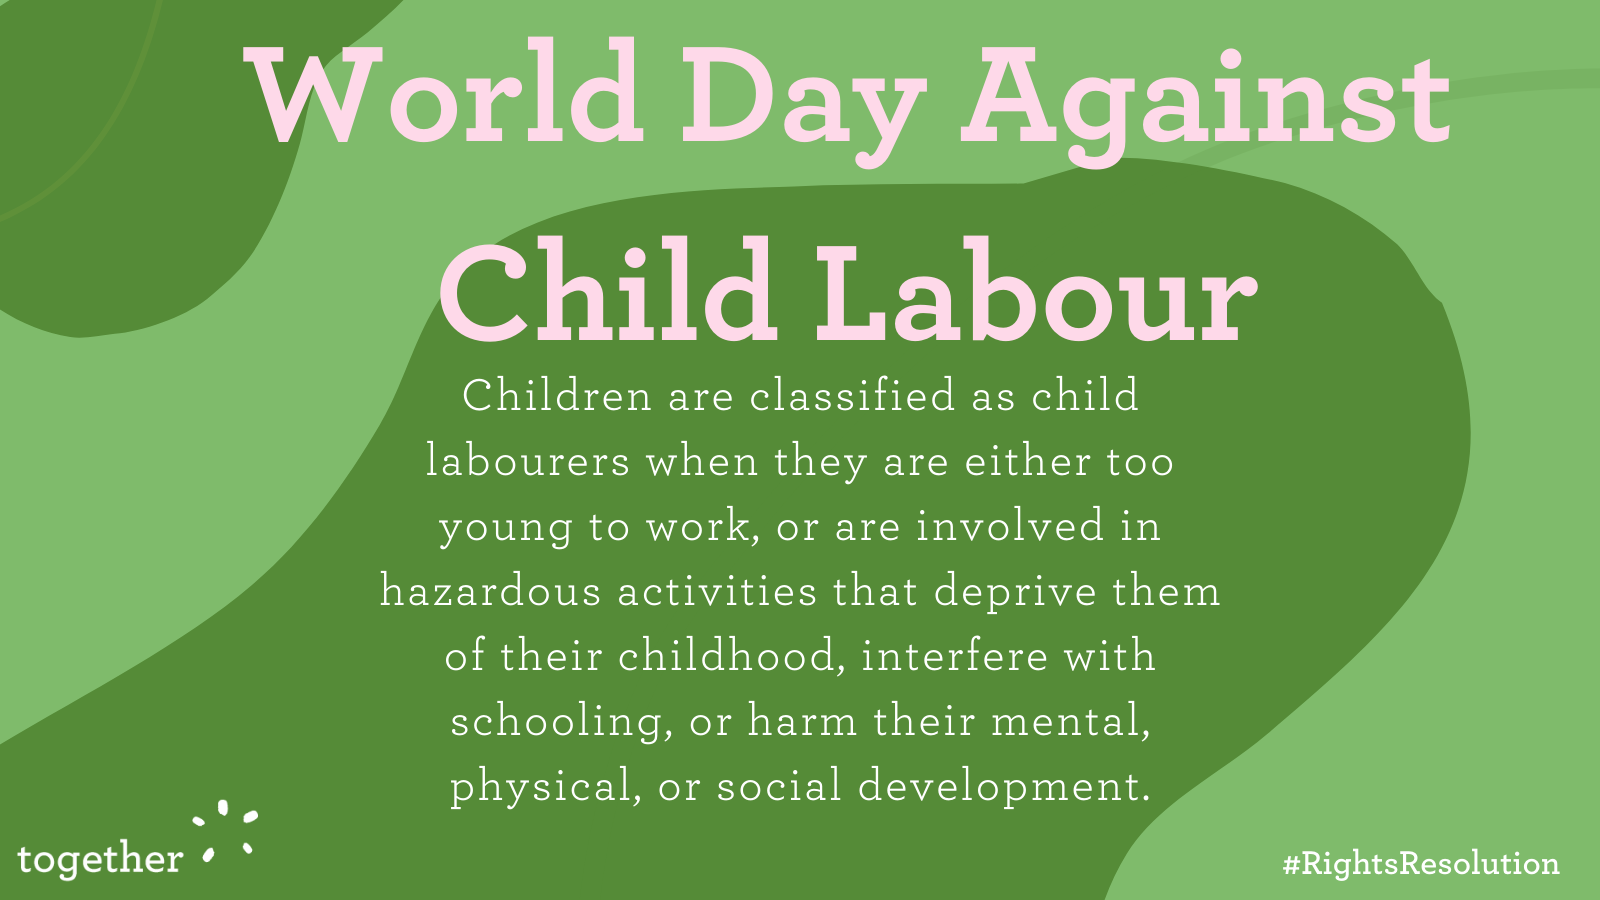 Children are classified as child labourers when they are either too young to work, or are involved in hazardous activities that deprive them of their childhood, interfere with schooling, or harm their mental, physical, or social development.